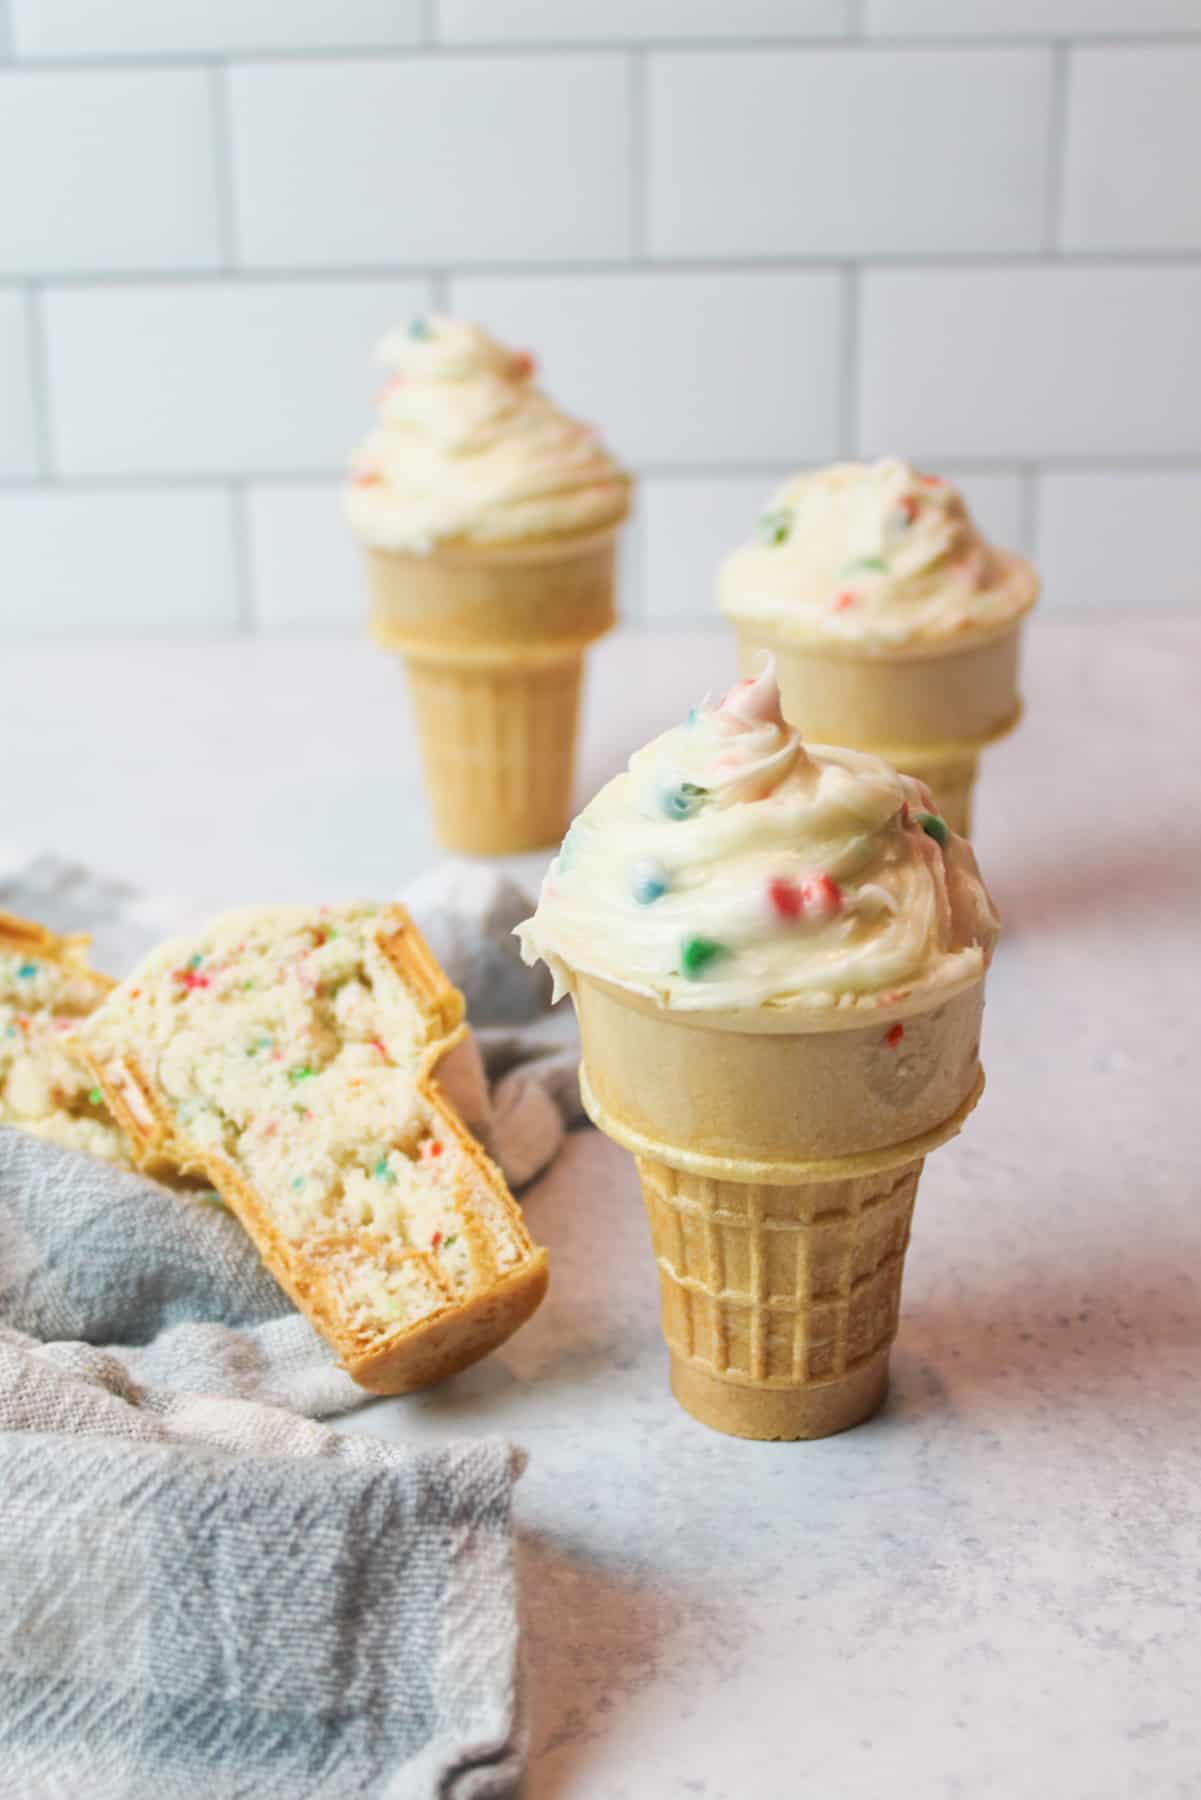 ice cream cone cupcakes with frosting and one cone split in half to reveal cake inside